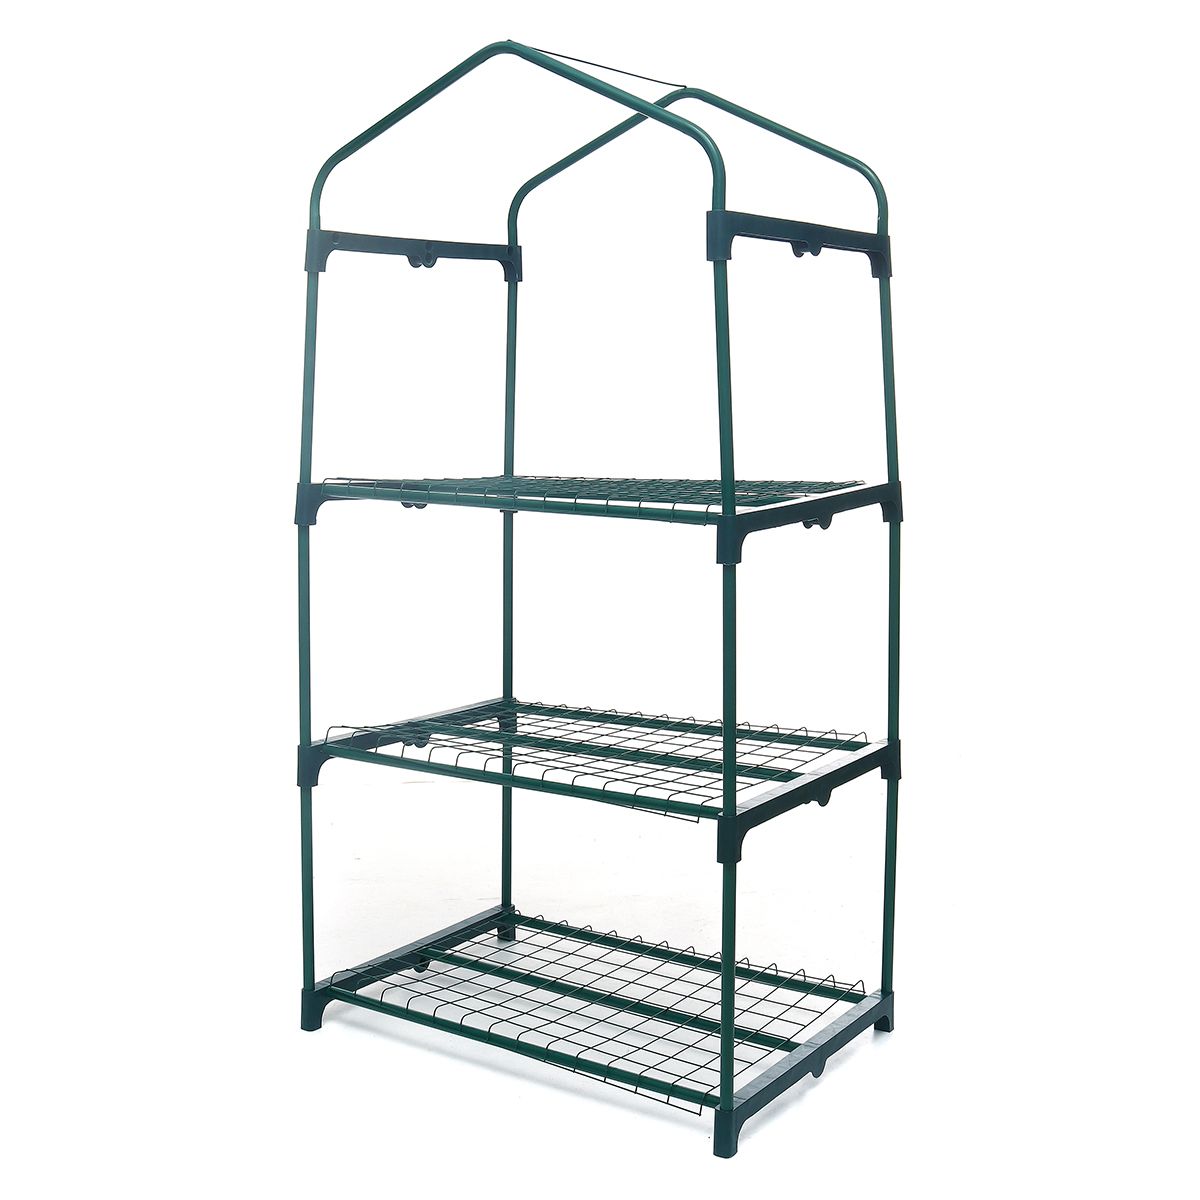 Mini-Greenhouse-AUEDW-4-Shelves-IndoorOutdoor-Greenhouse-with-Zippered-Cover-and-Metal-Shelves-for-G-1592630